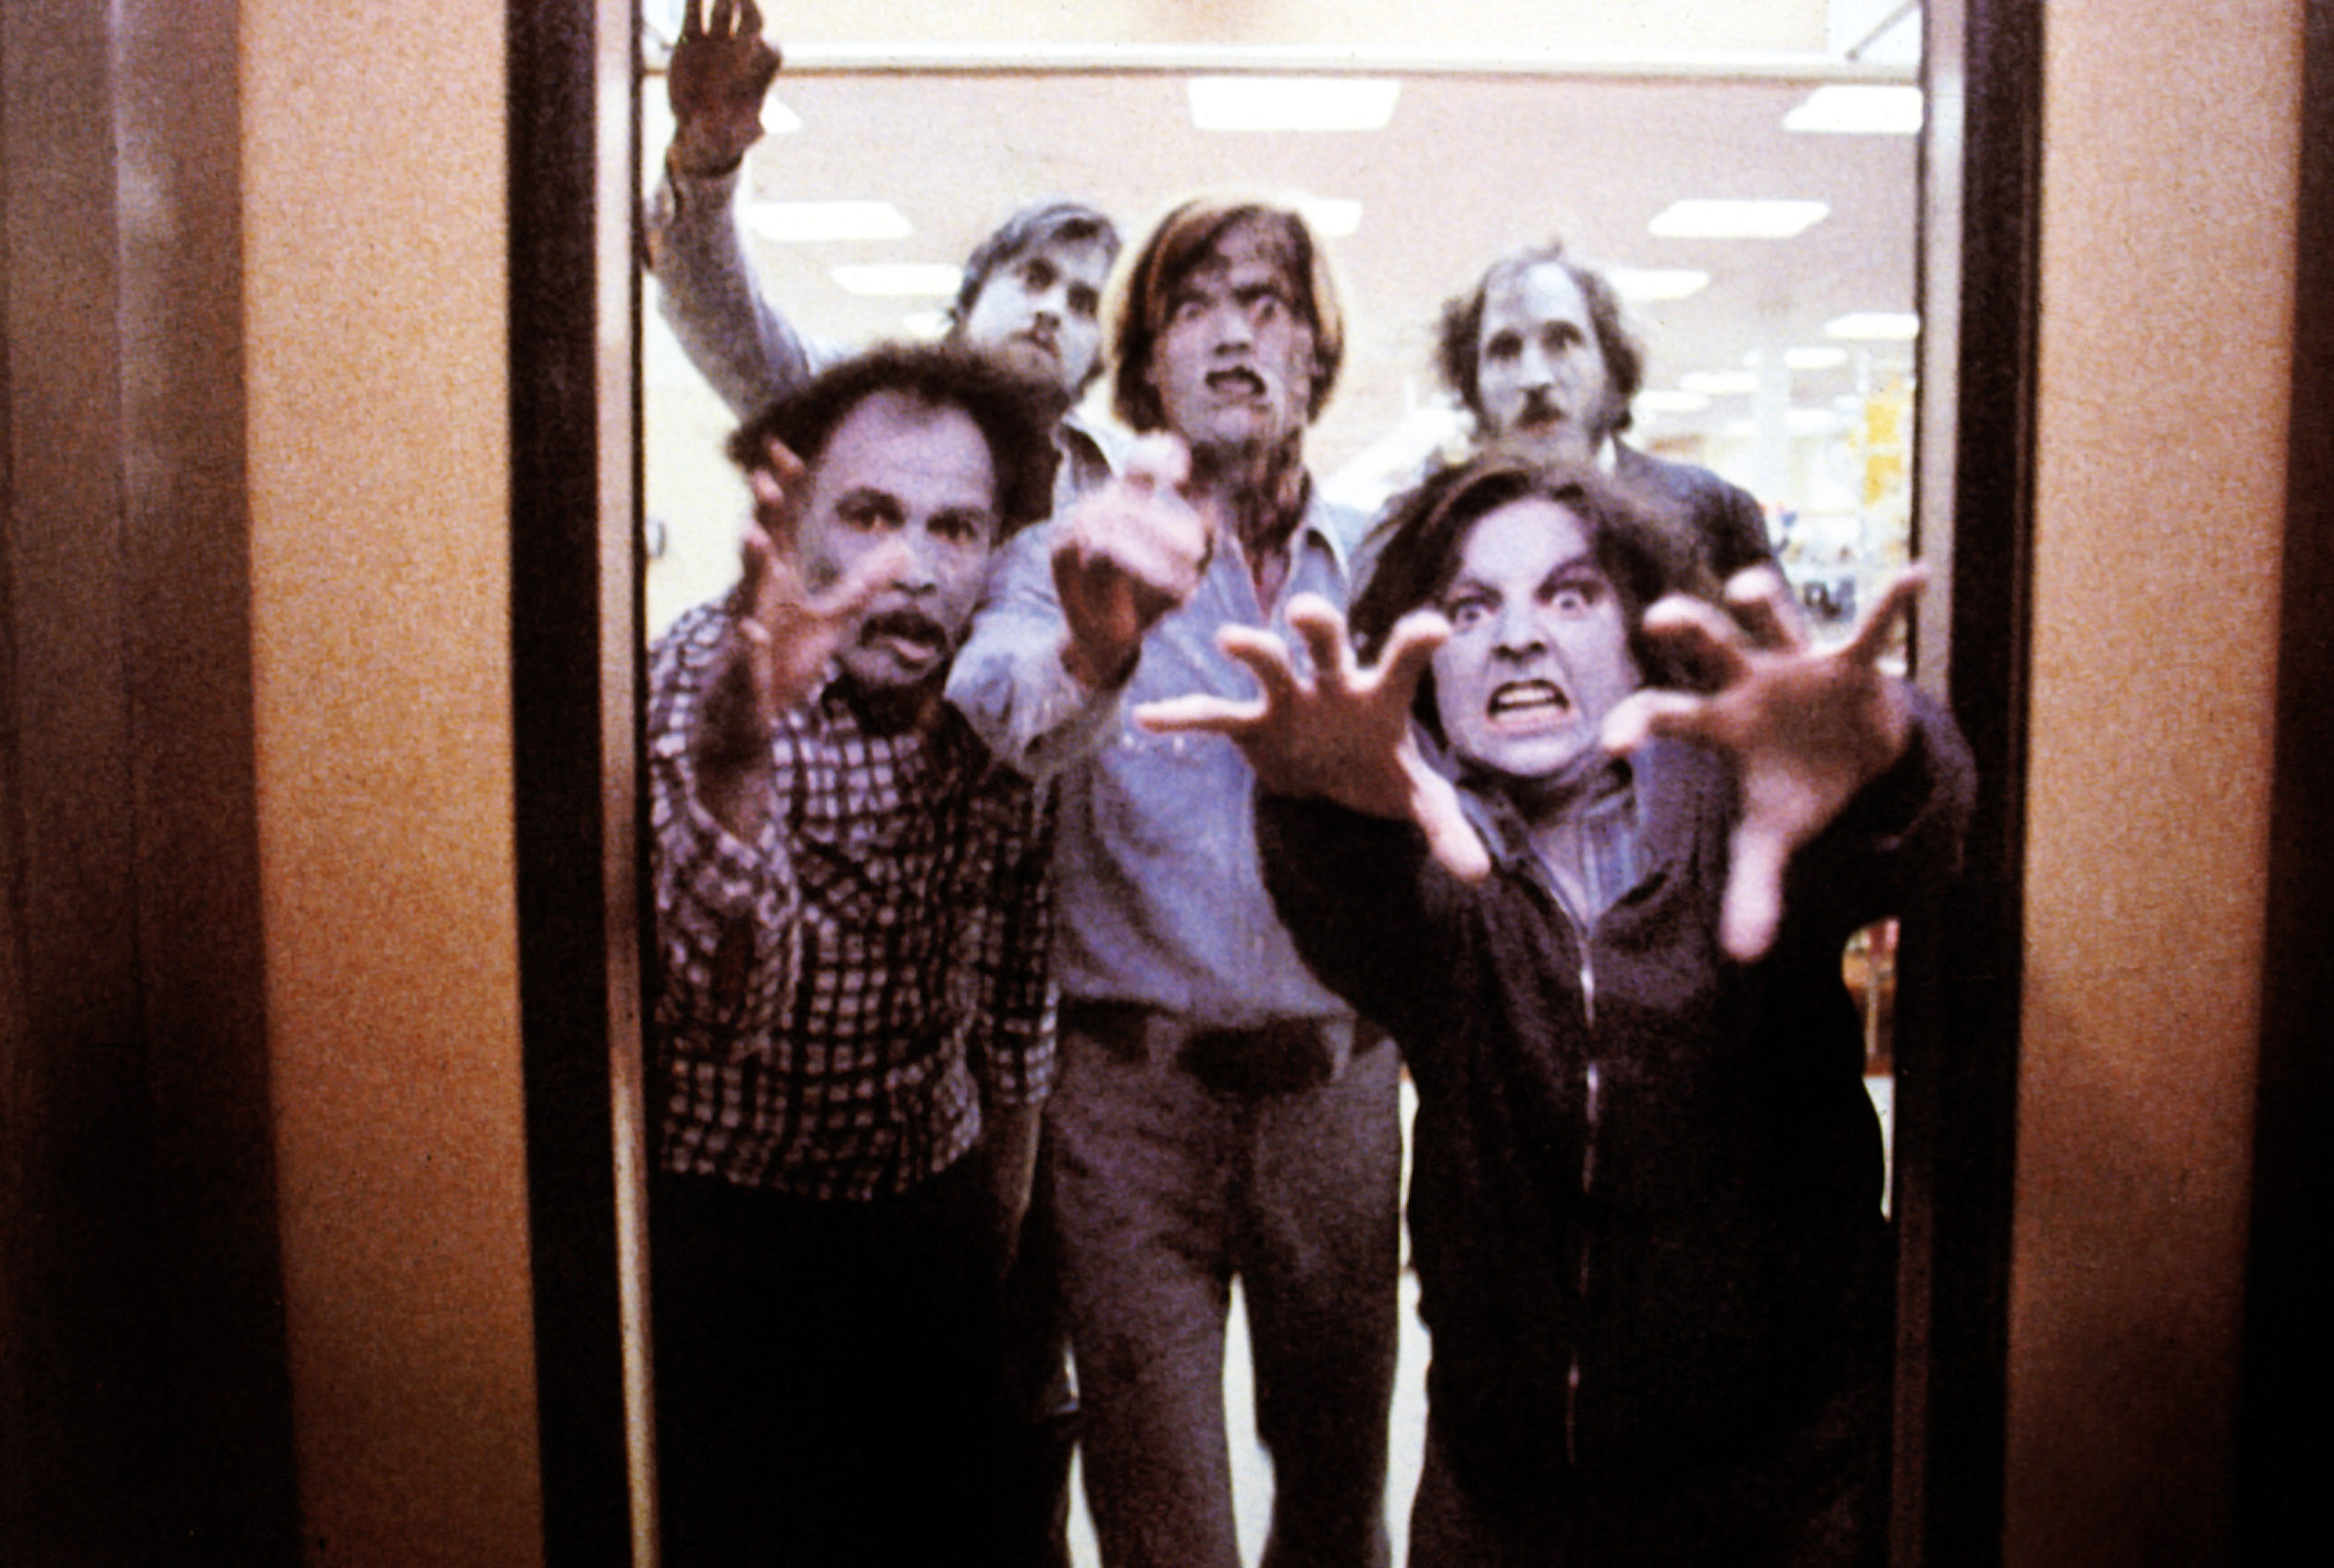 A bunch of zombies in an office